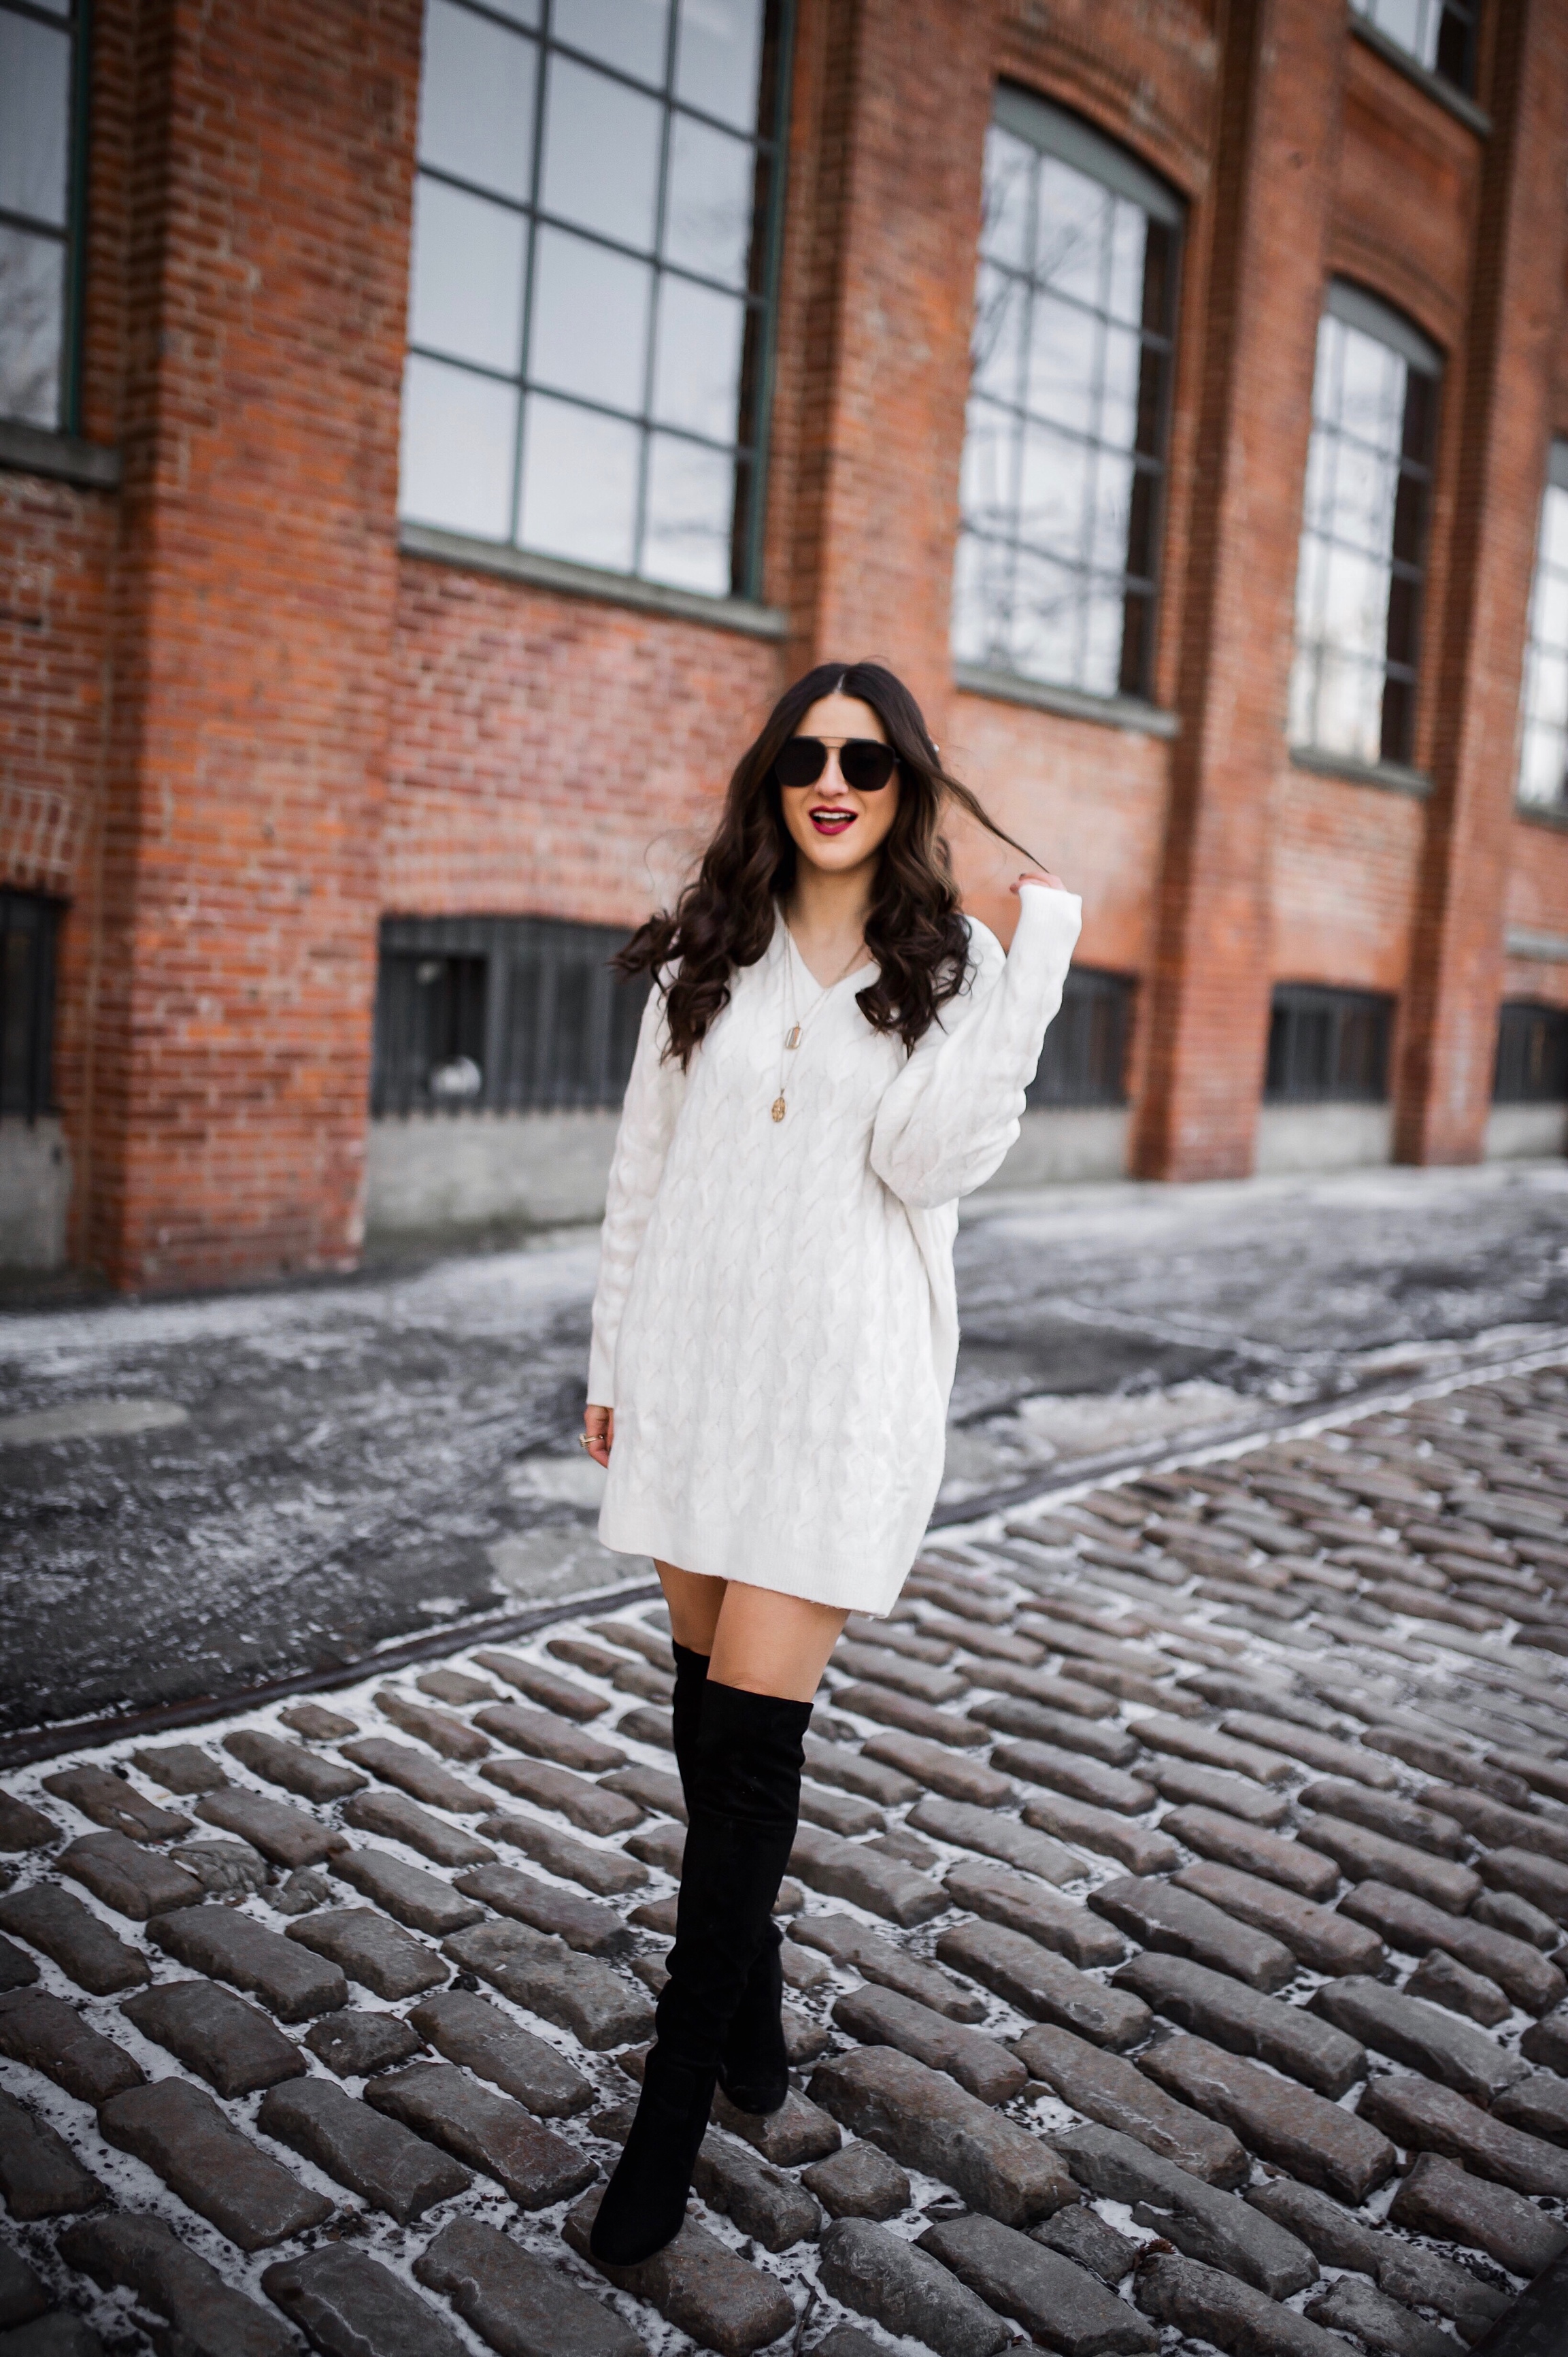 Are You Making This Business Mistake? Chunky White Sweater Dress Over The Knee Boots Esther Santer Fashion Blog NYC Street Style Blogger Outfit OOTD Trendy Shopping Girl What How Wear Industry Relationships Mindset Work Career Important Lesson Boots.JPG